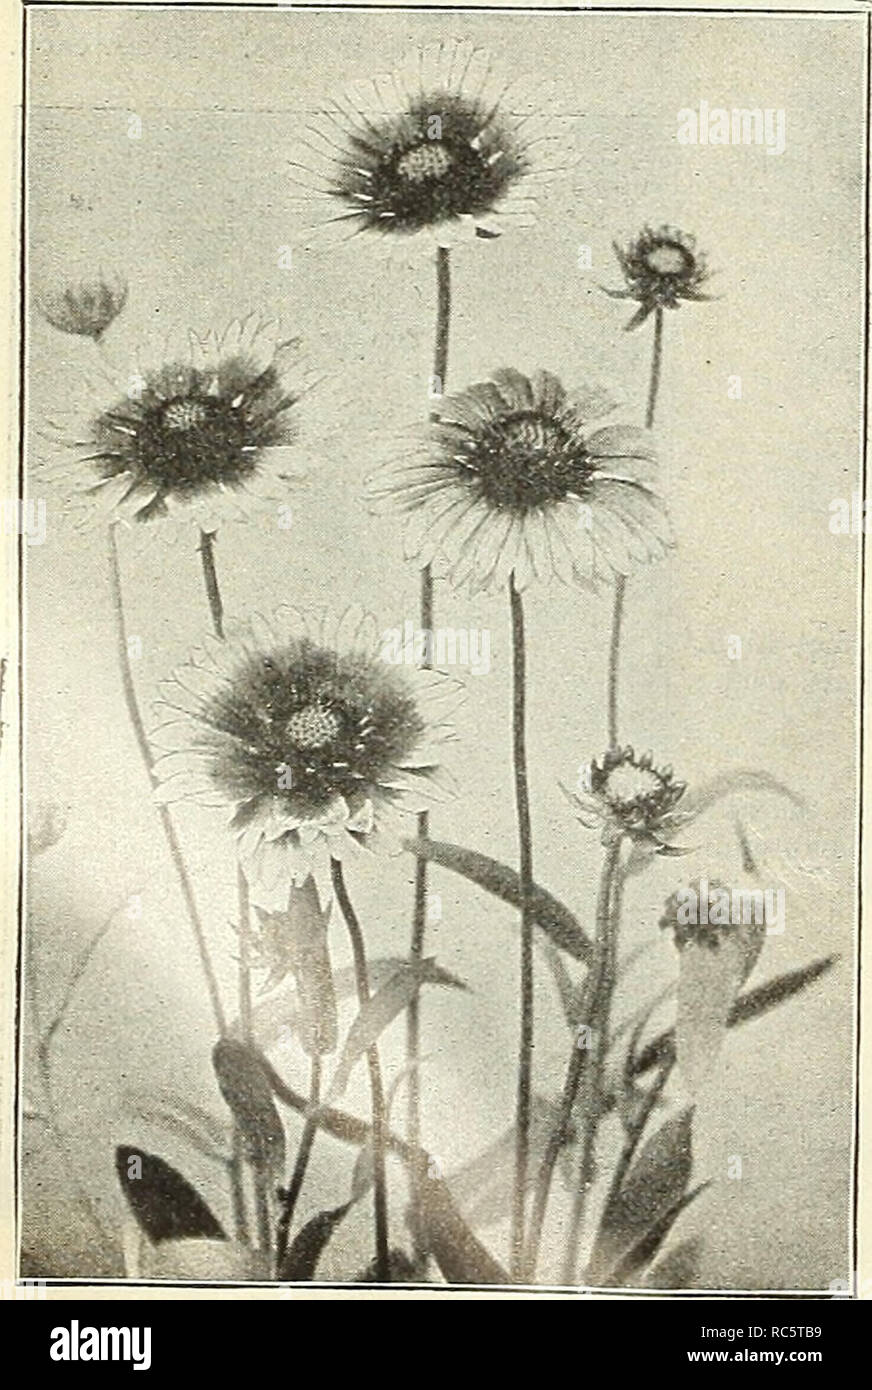 . Dreer's garden calendar : 1903. Seeds Catalogs; Nursery stock Catalogs; Gardening Equipment and supplies Catalogs; Flowers Seeds Catalogs; Vegetables Seeds Catalogs; Fruit Seeds Catalogs. Euphorbia Corollata.. Gaillardia Grandiflora. GALEGA (Goat's Rue). Officinalis. A useful border plant, producing showy racemes of rosy-purple flowers in great profusion during July and Aug- ust: height, 2 feet. Officinalis Alba. A white- flowered form of the above. 15 cts. each; §1.50 per doz. GAILLARDIA. Grandiflora. One of the show- iest and most effective hardy plants; beginning to flower in June, they c Stock Photo